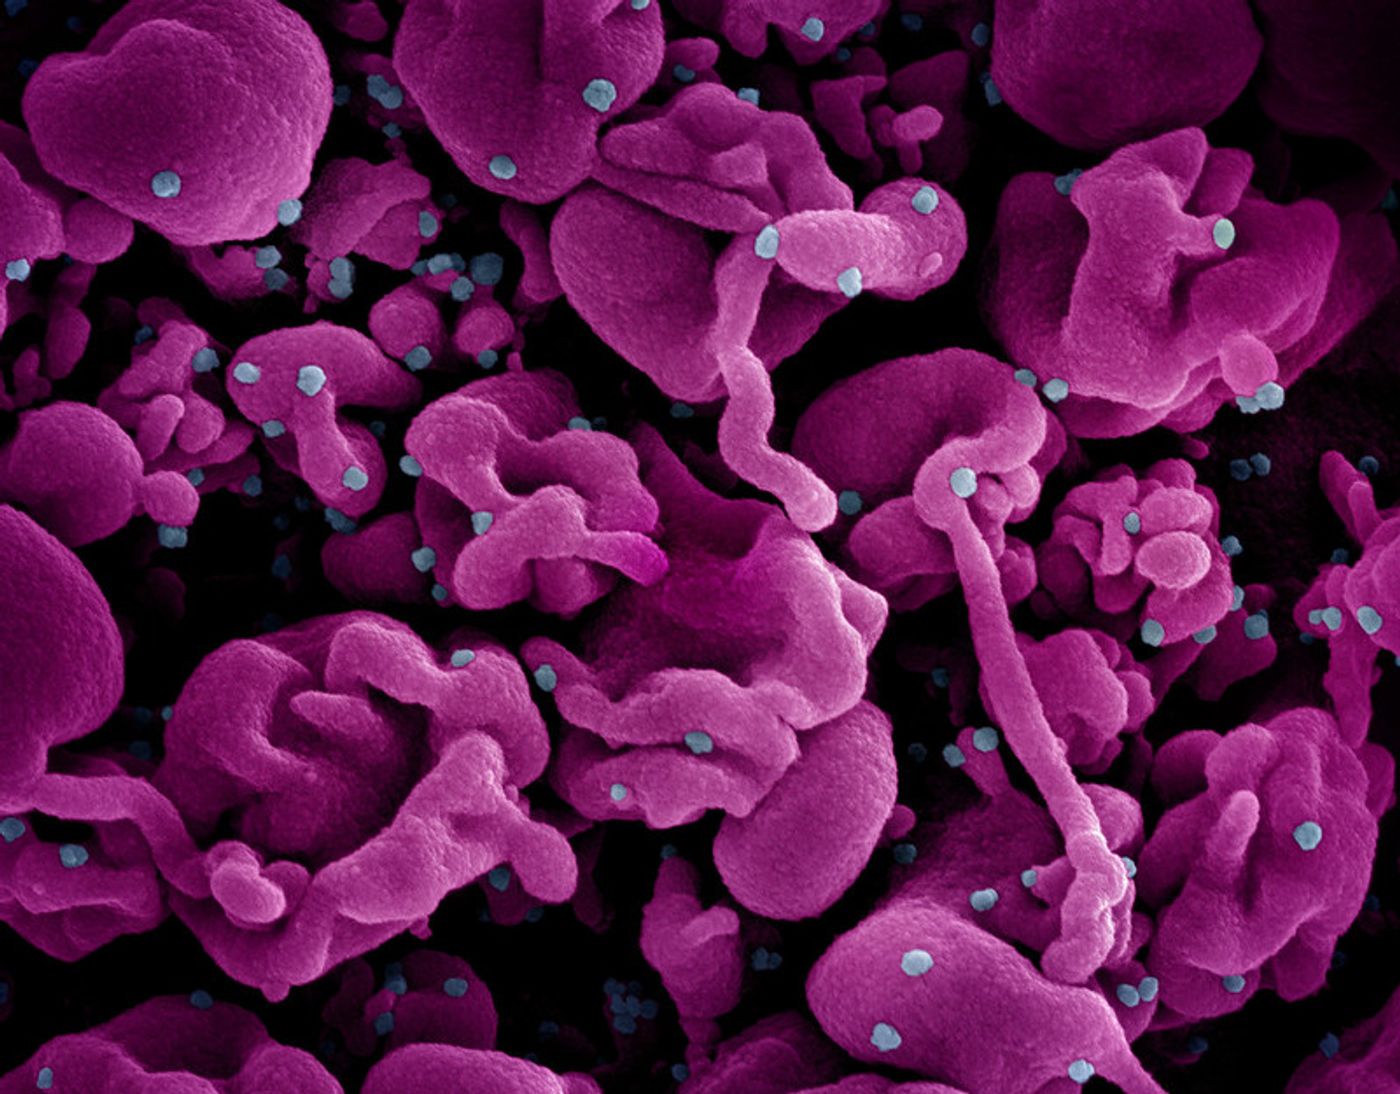 Colorized scanning electron micrograph of a cell (pink) infected with the Omicron strain of SARS-CoV-2 virus particles (blue), isolated from a patient sample. Image captured at the NIAID Integrated Research Facility (IRF) in Fort Detrick, Maryland. Credit: NIAID